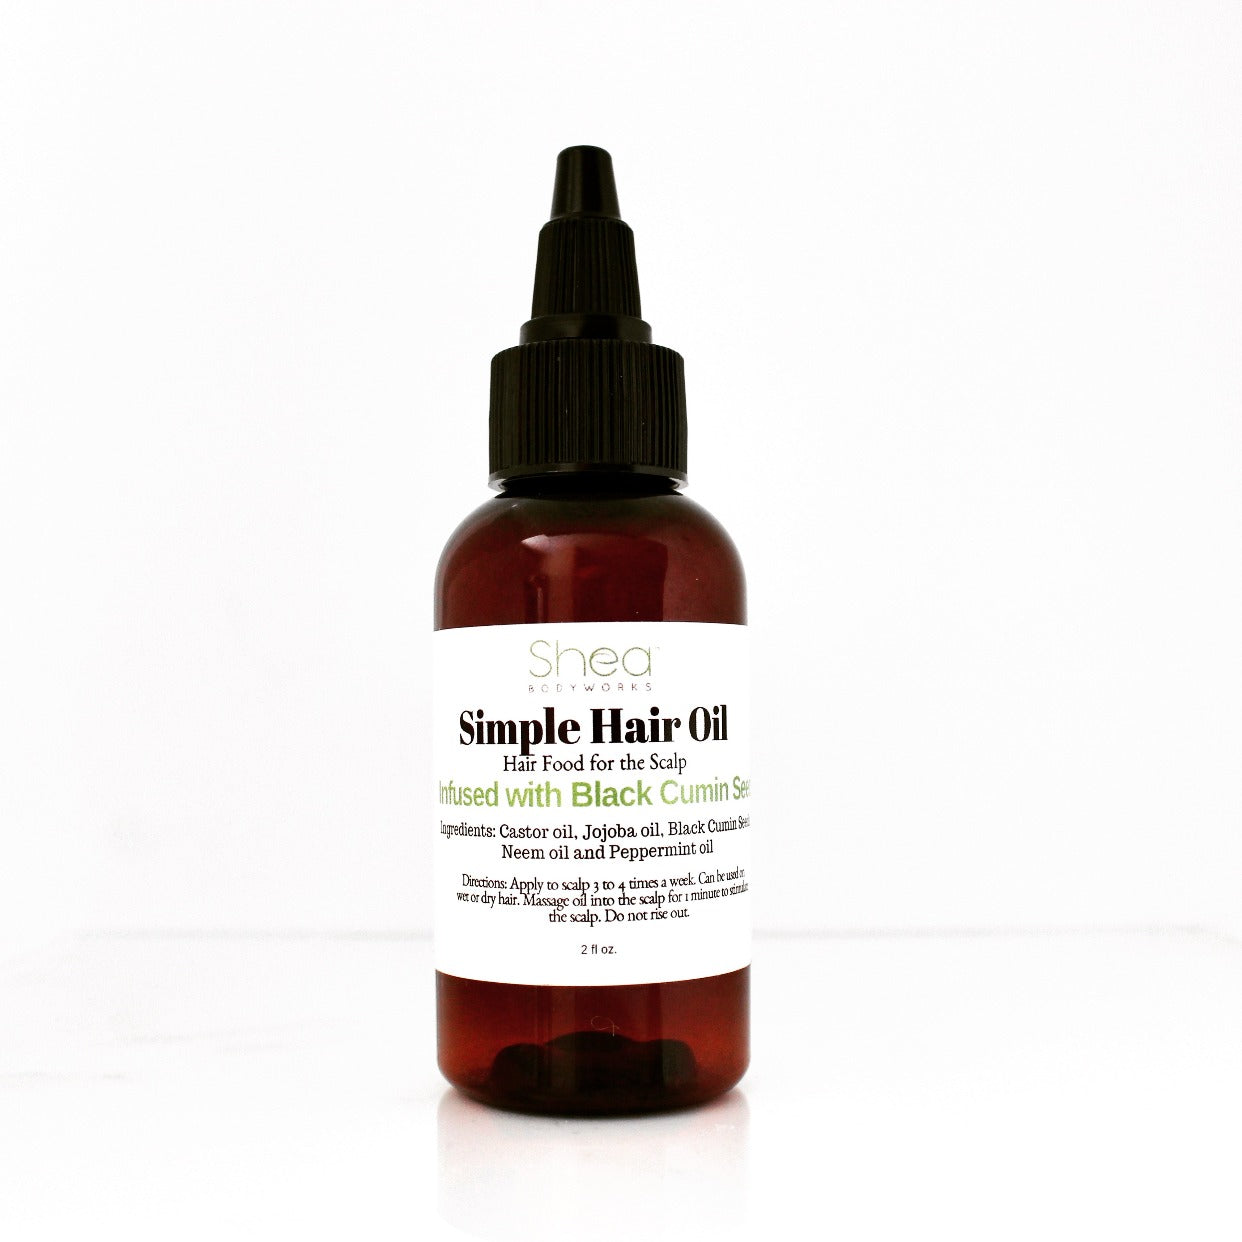 Simple Hair oil with Black Cumin Seed - Hair Food for the scalp, Black Cumin Seed contains a  powerful antihistamine that helps to restore hair strength and helps to grow hair that has been thinned or damaged.